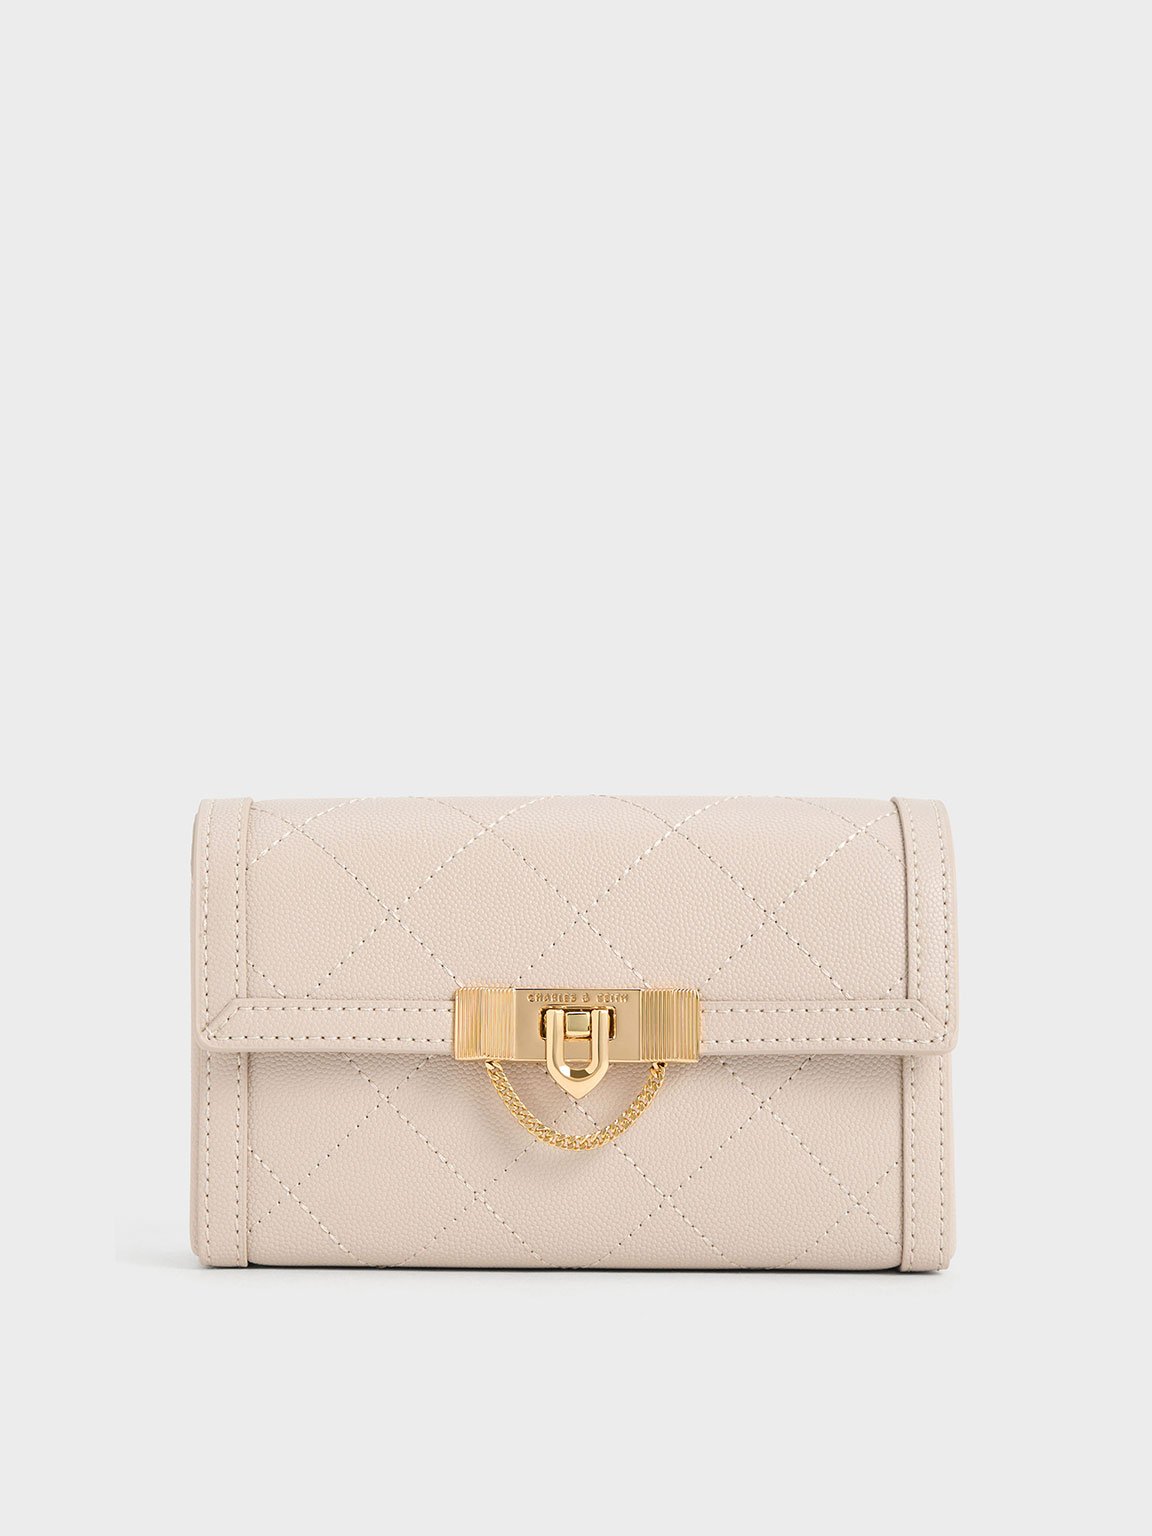 Charles & Keith Tallulah Quilted Push-lock Clutch In Oat